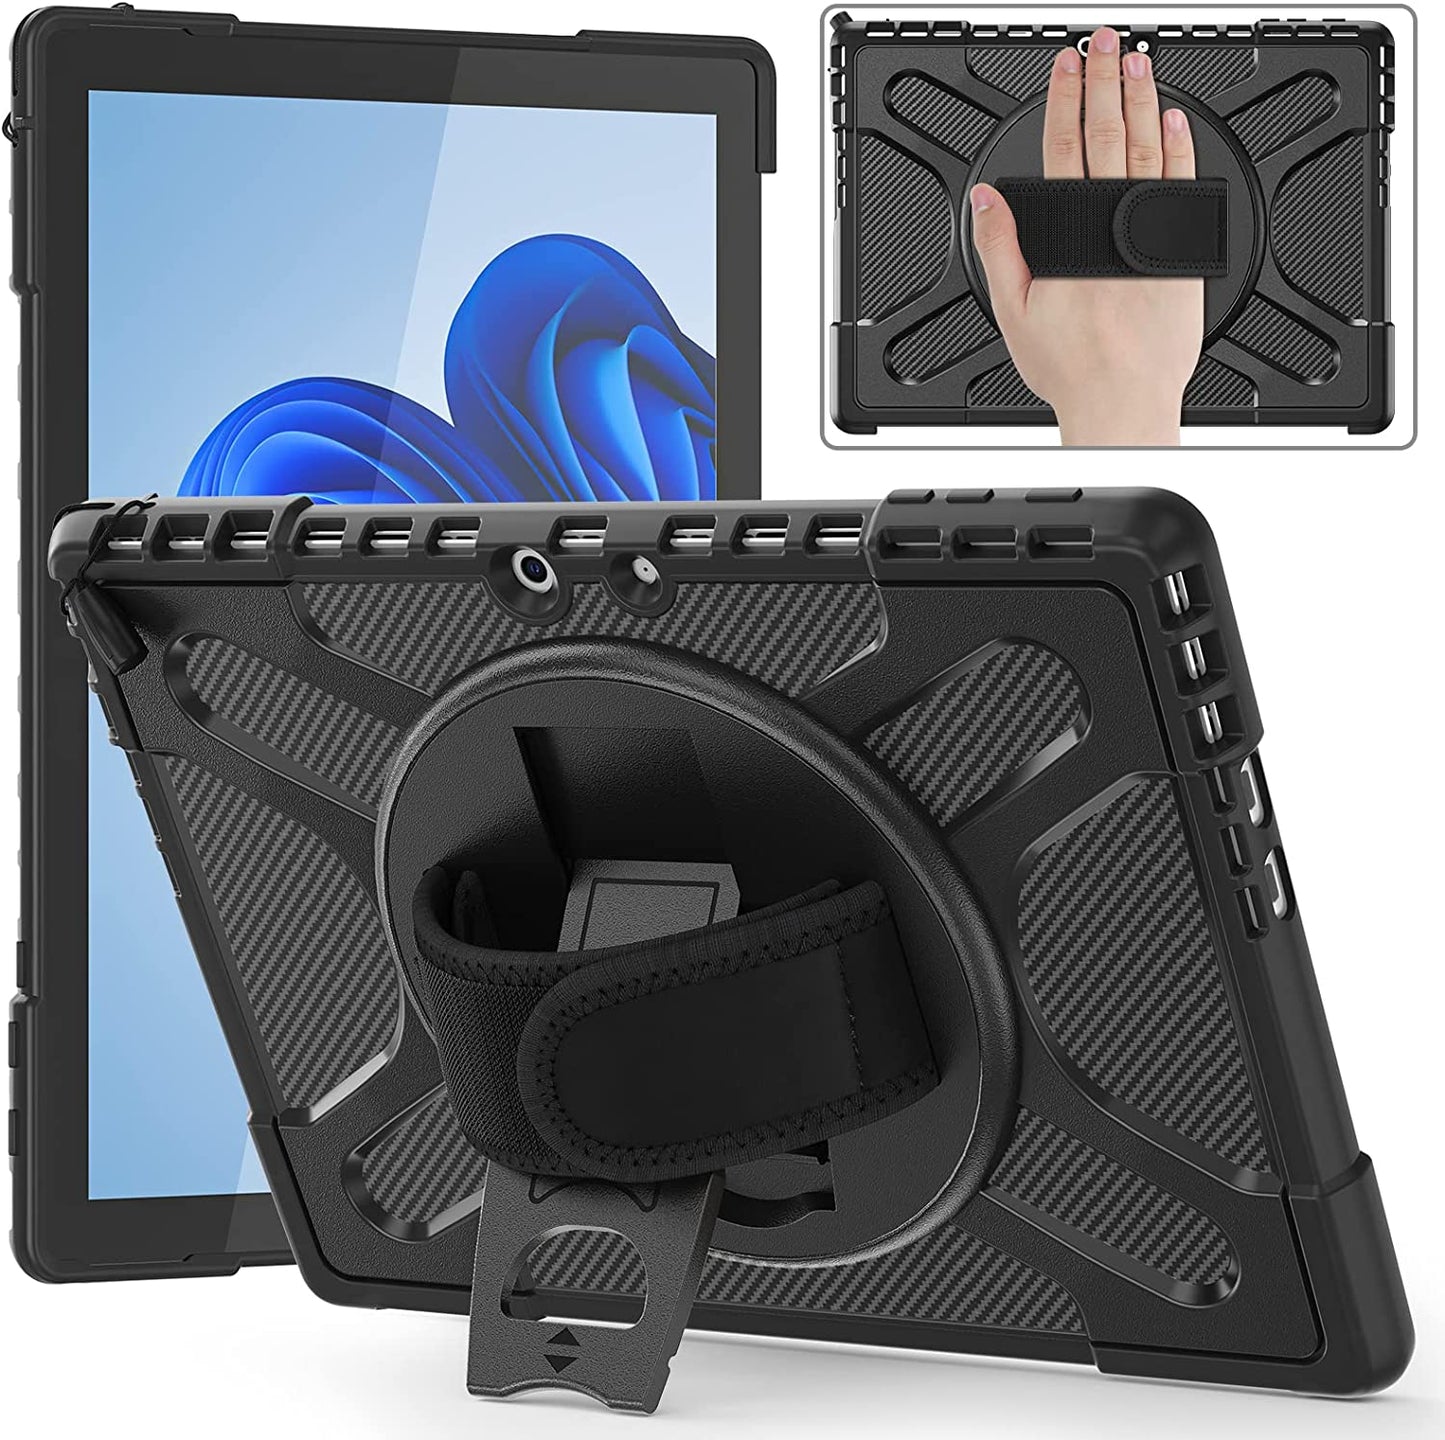 Yapears Surface Case for Pro 7 (2019) / Pro 6 (2018) / Pro 5 (2017) / Pro 4 (2015) with Pencil Holder, Stand, Hand Strap and Shoulder Belt for Surface 12.3 inch Tablet Heavy Duty Shockproof-Black